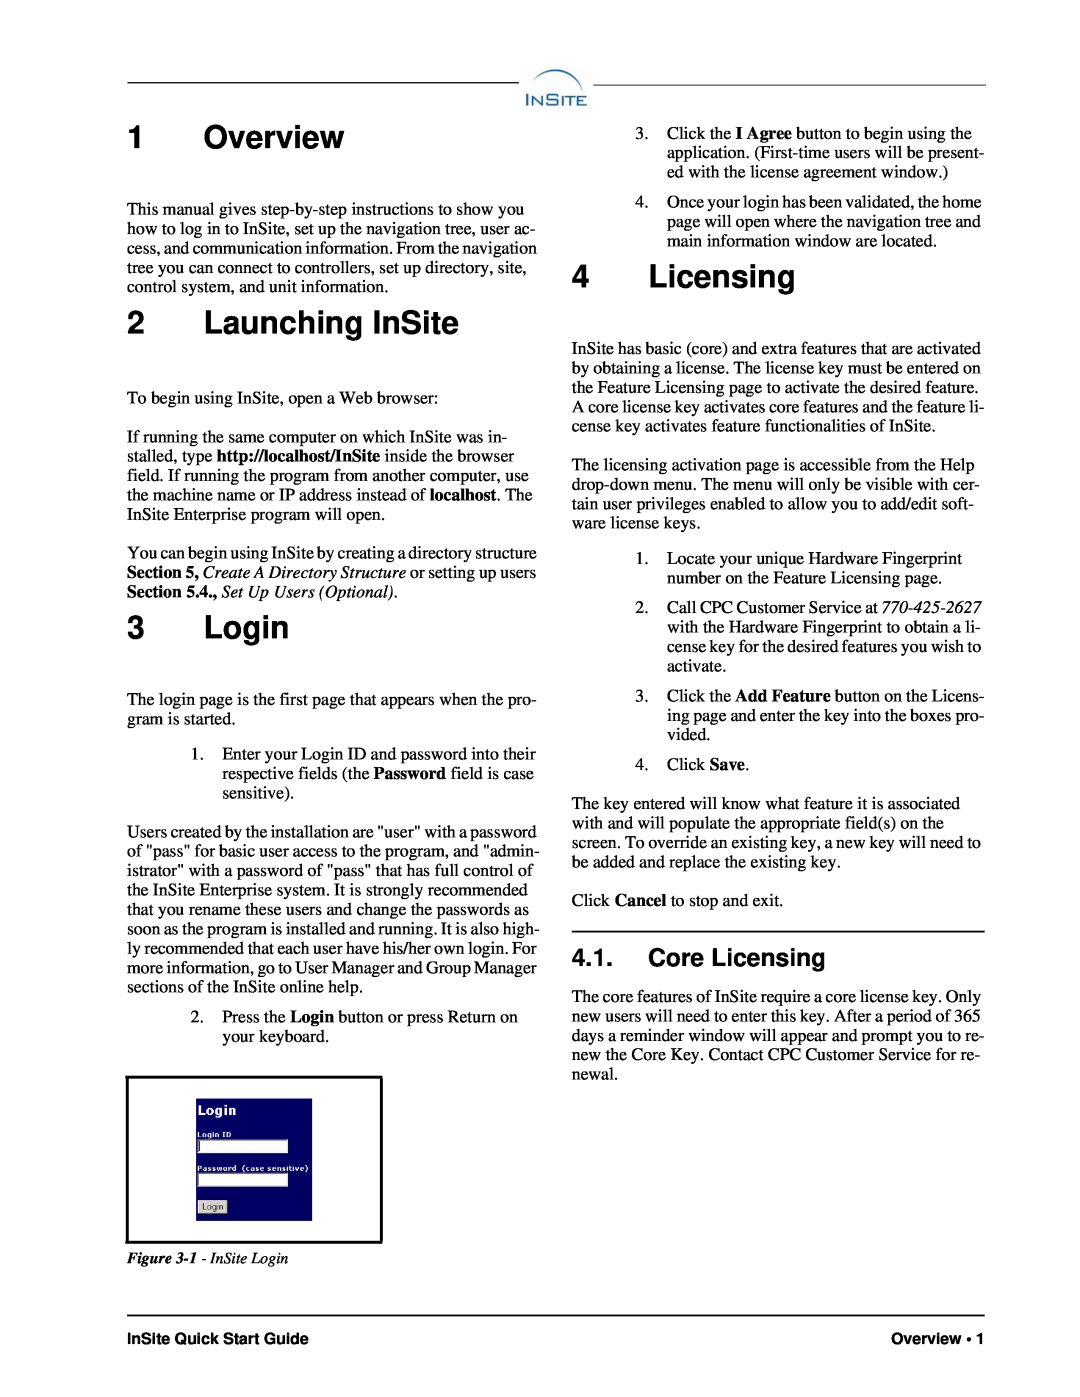 Emerson 026-1011 quick start Overview, Launching InSite, Login, Core Licensing 